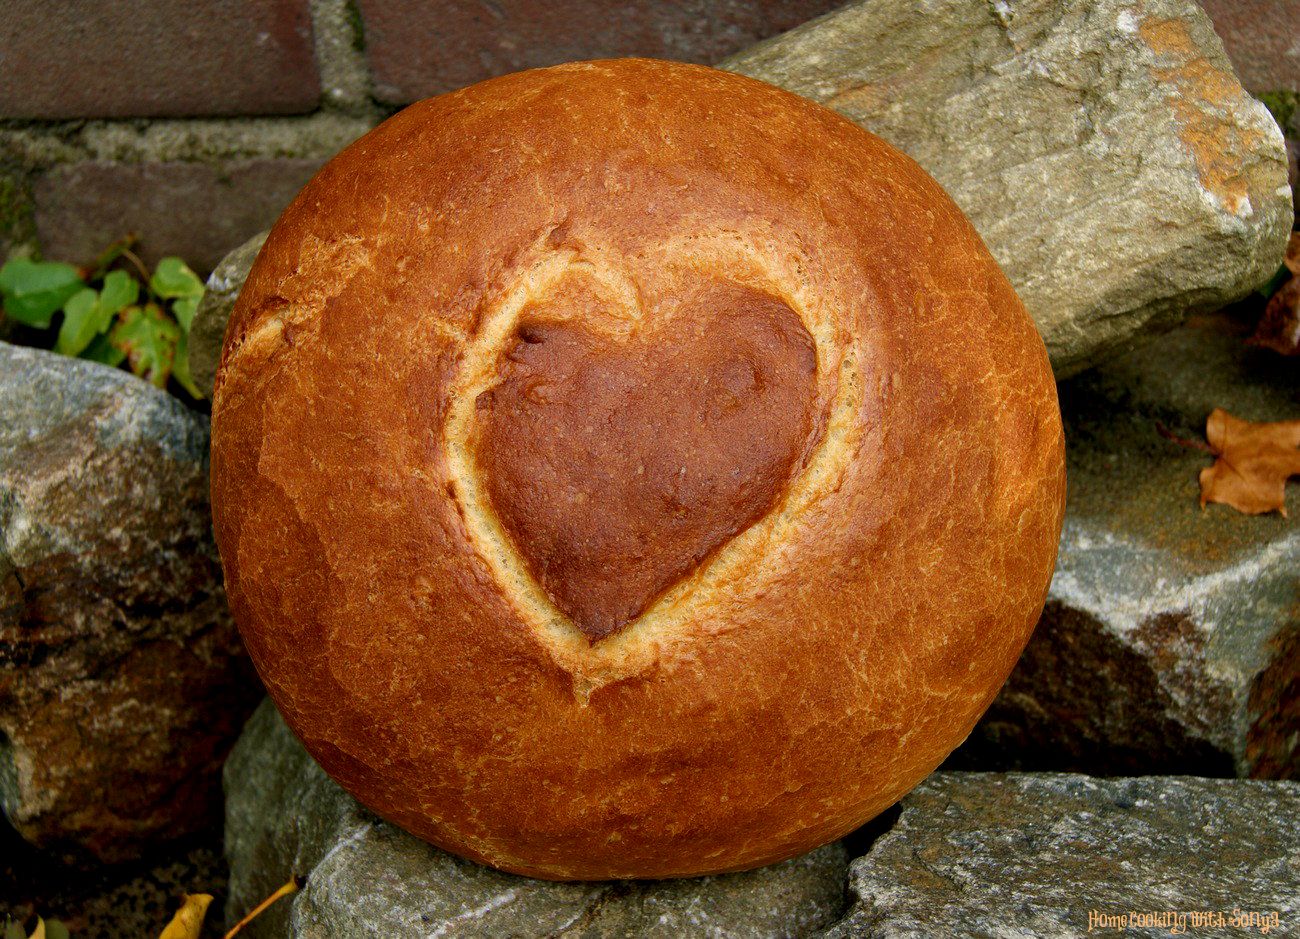 22.10, Showing the love for bread baking